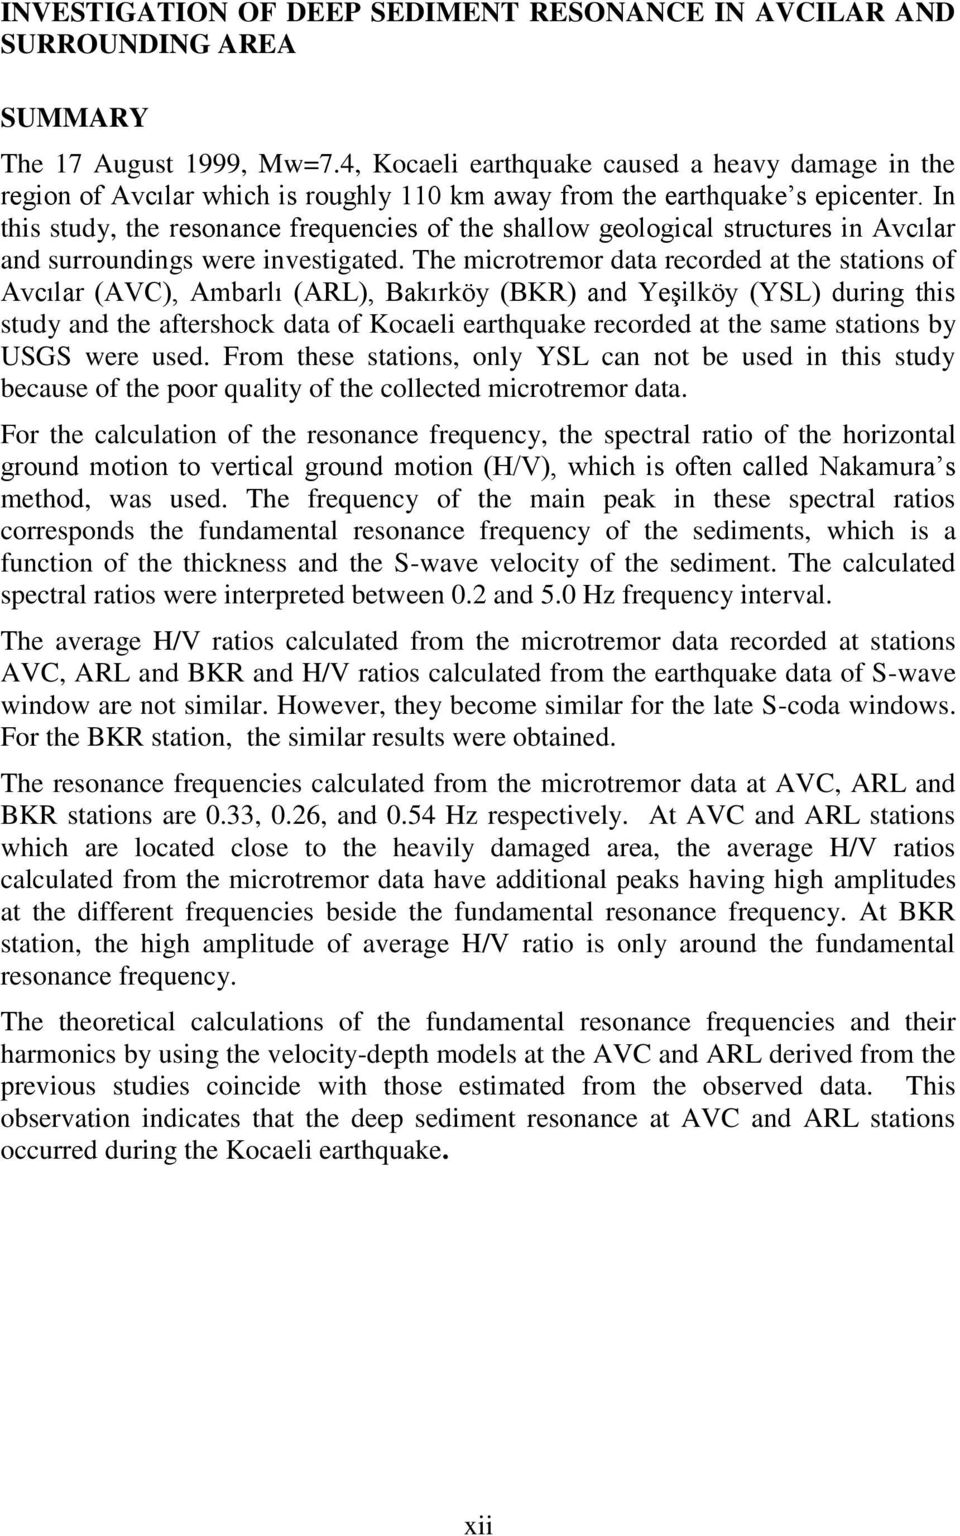 In this study, the resonance frequencies of the shallow geological structures in Avcılar and surroundings were investigated.